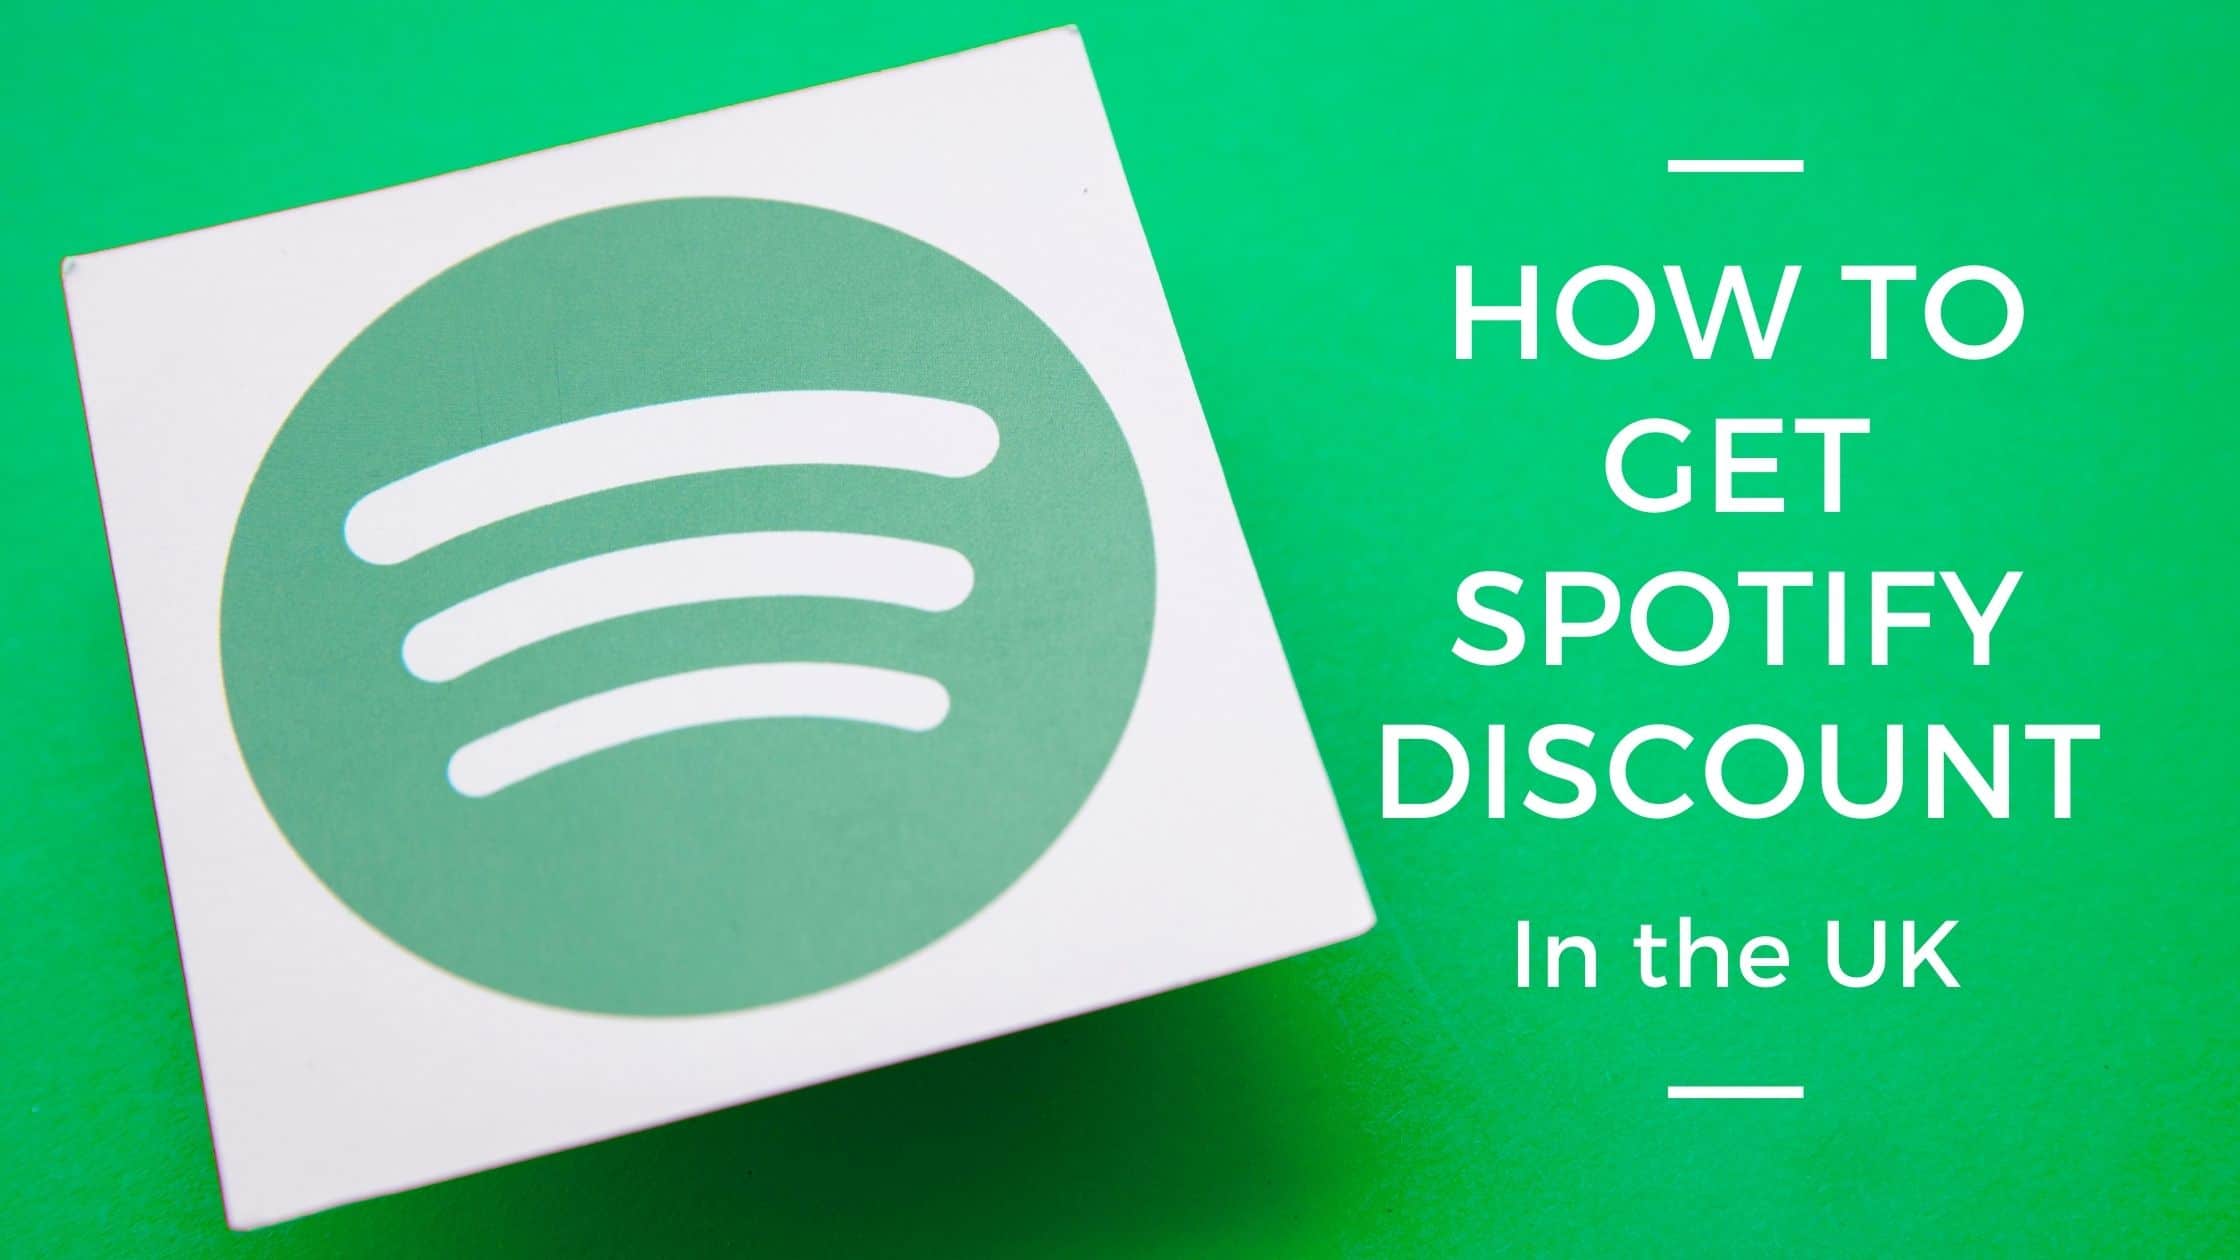 How to Get Spotify Discount in the UK